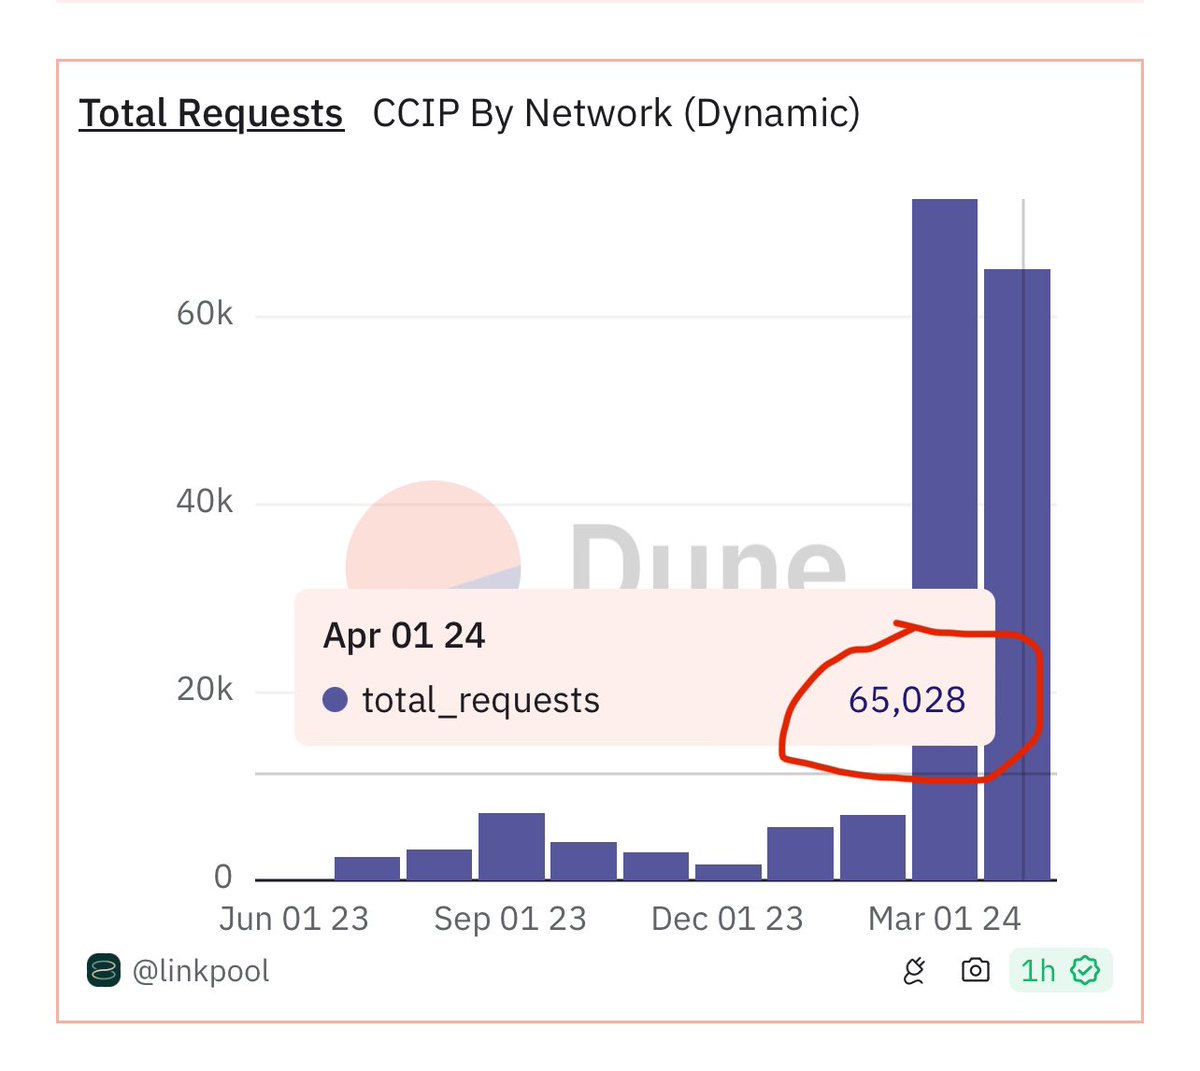 6884 #Chainlink #CCIP requests in the month of February 72551 in the month of March - parabolic movement 65028 half way through the month of April - fascinating to see the continuation of the parabolic movement New reduction in cost of fees should continue the trend $LINK